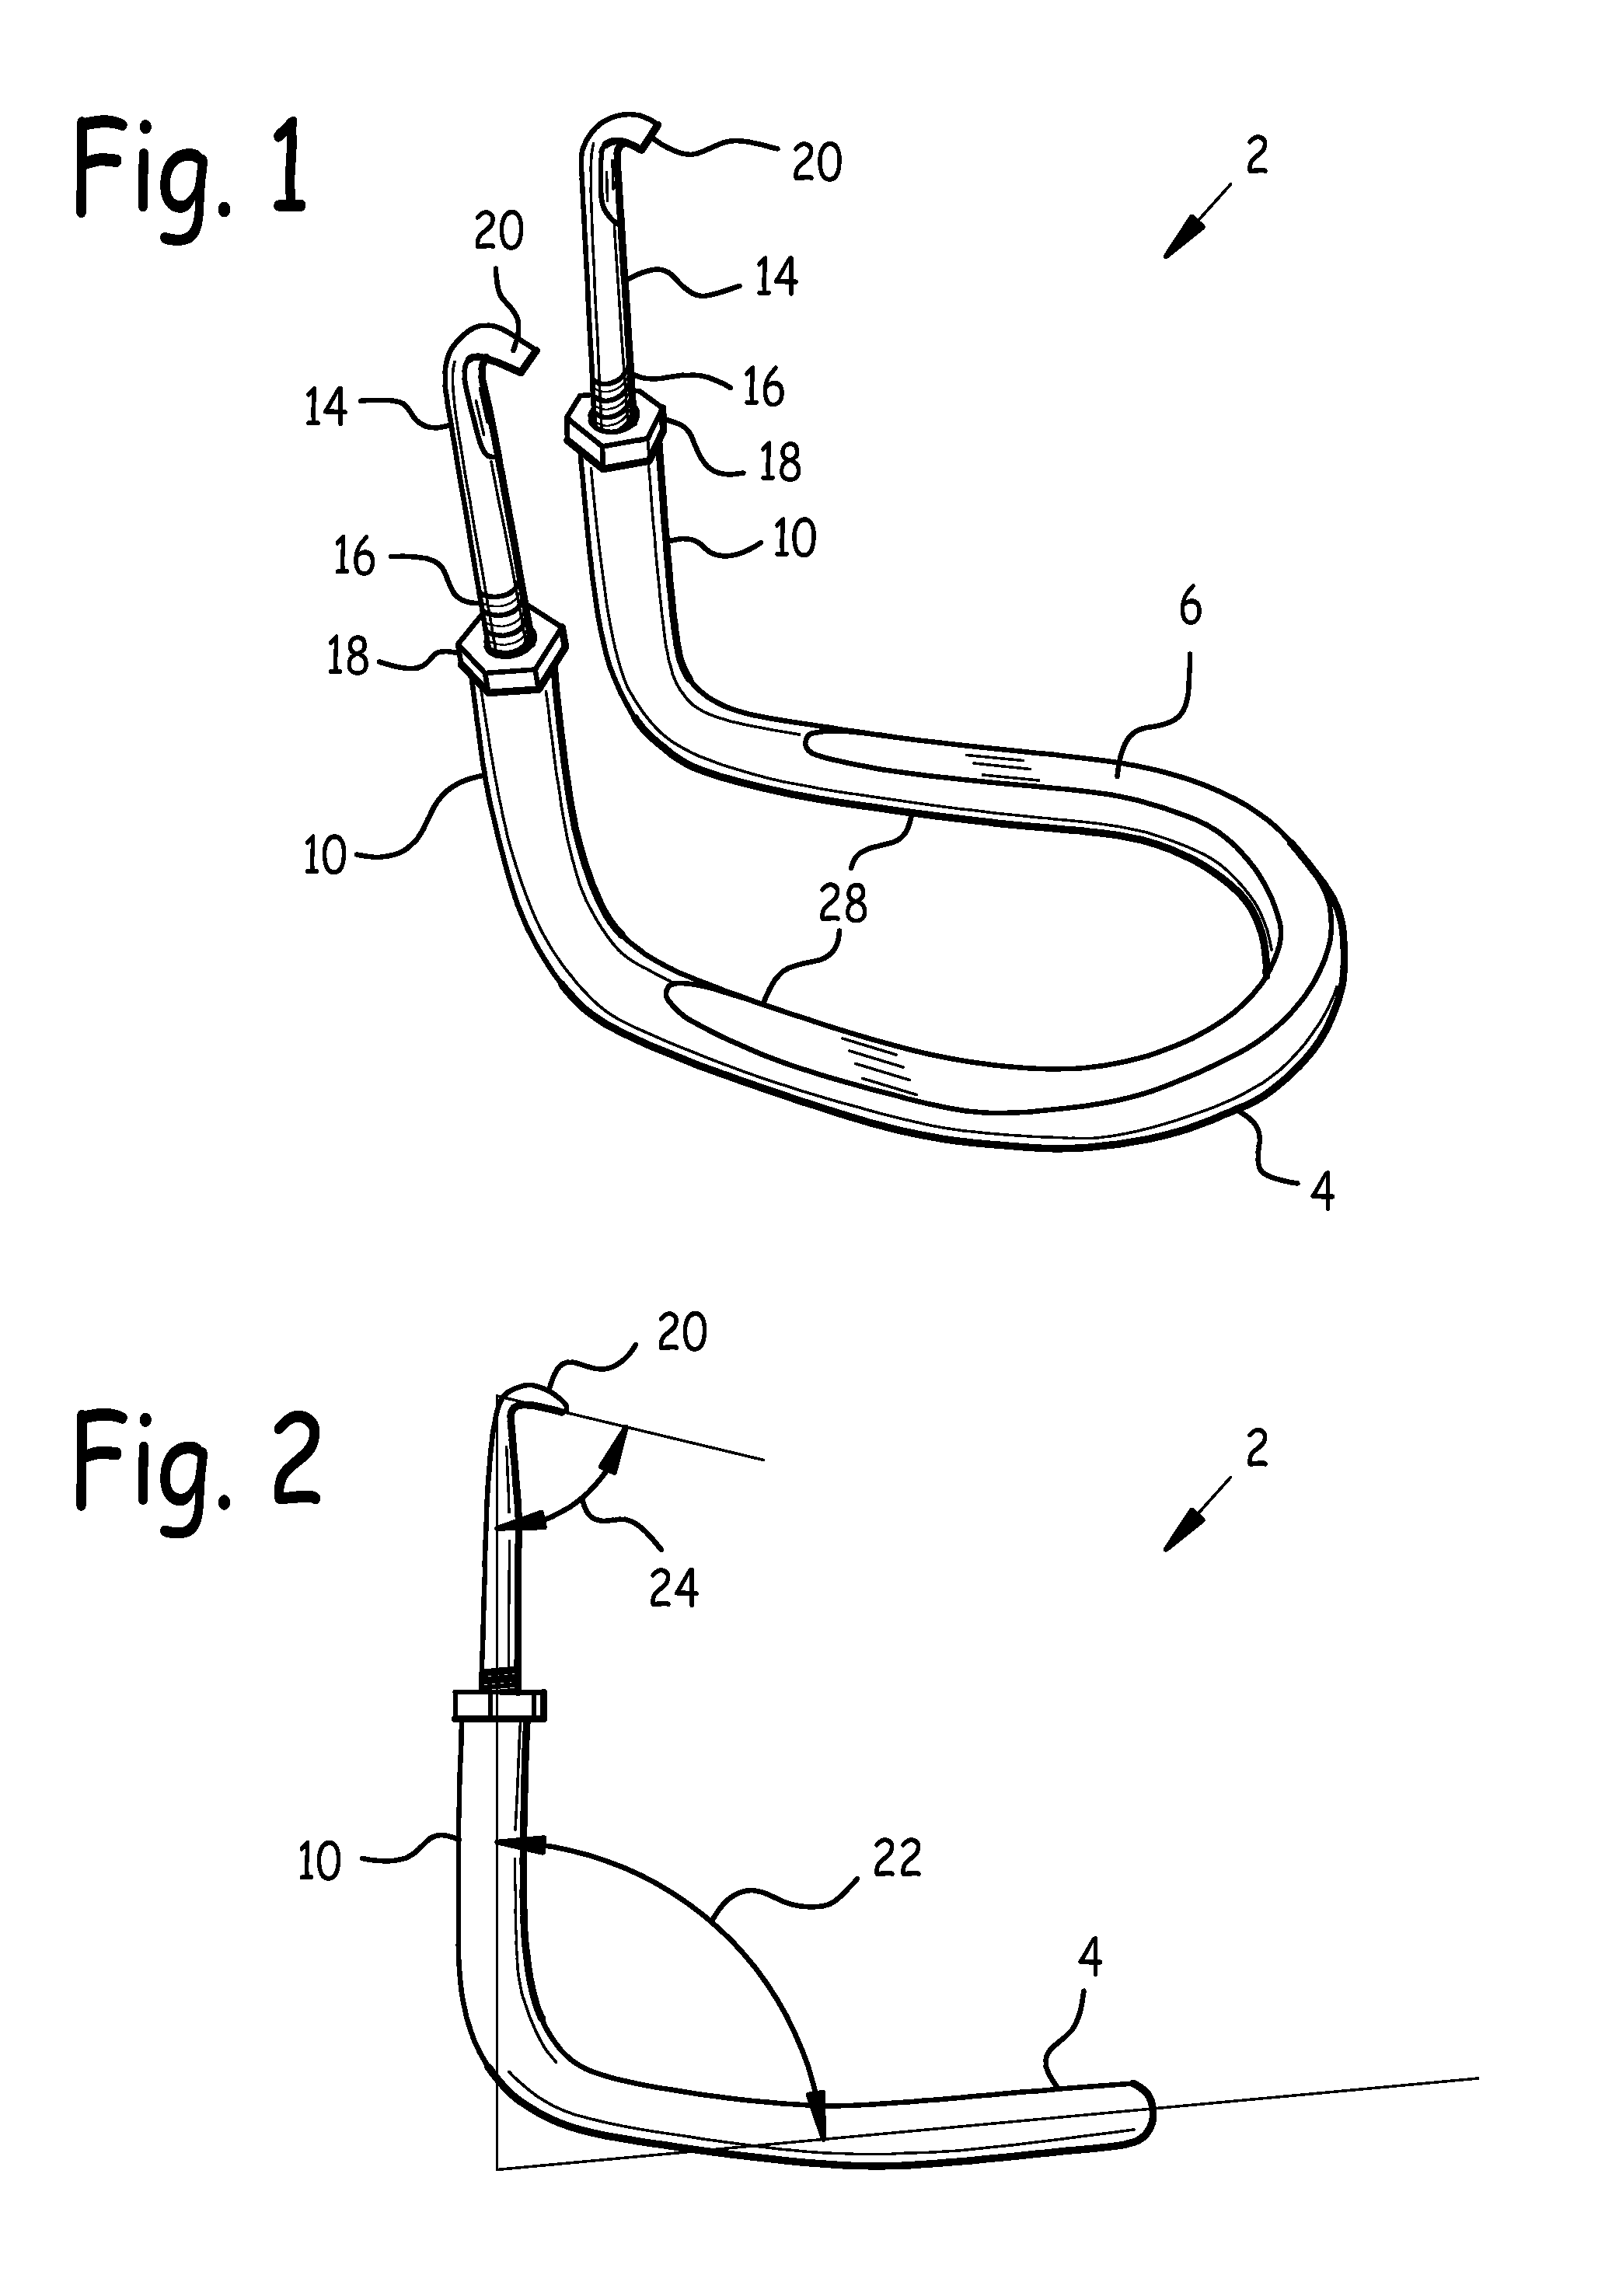 Upper denture release apparatus and method of use